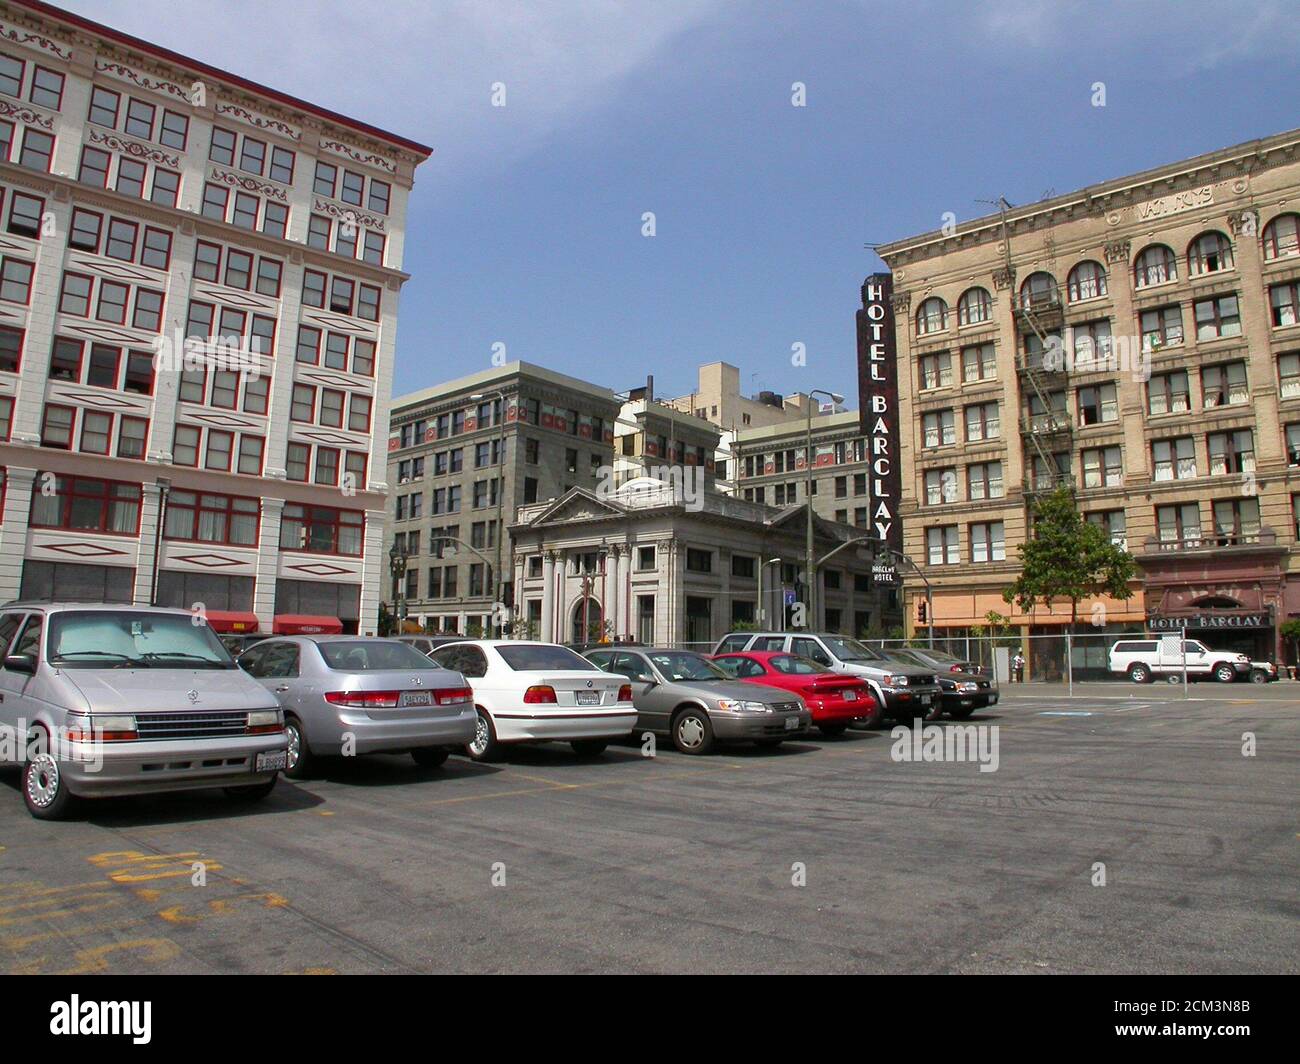 Los Angeles, California, USA - August 2002:  Archival view of historic buildings at the corner of 4th Street and Main Street in downtown Los Angeles. Stock Photo